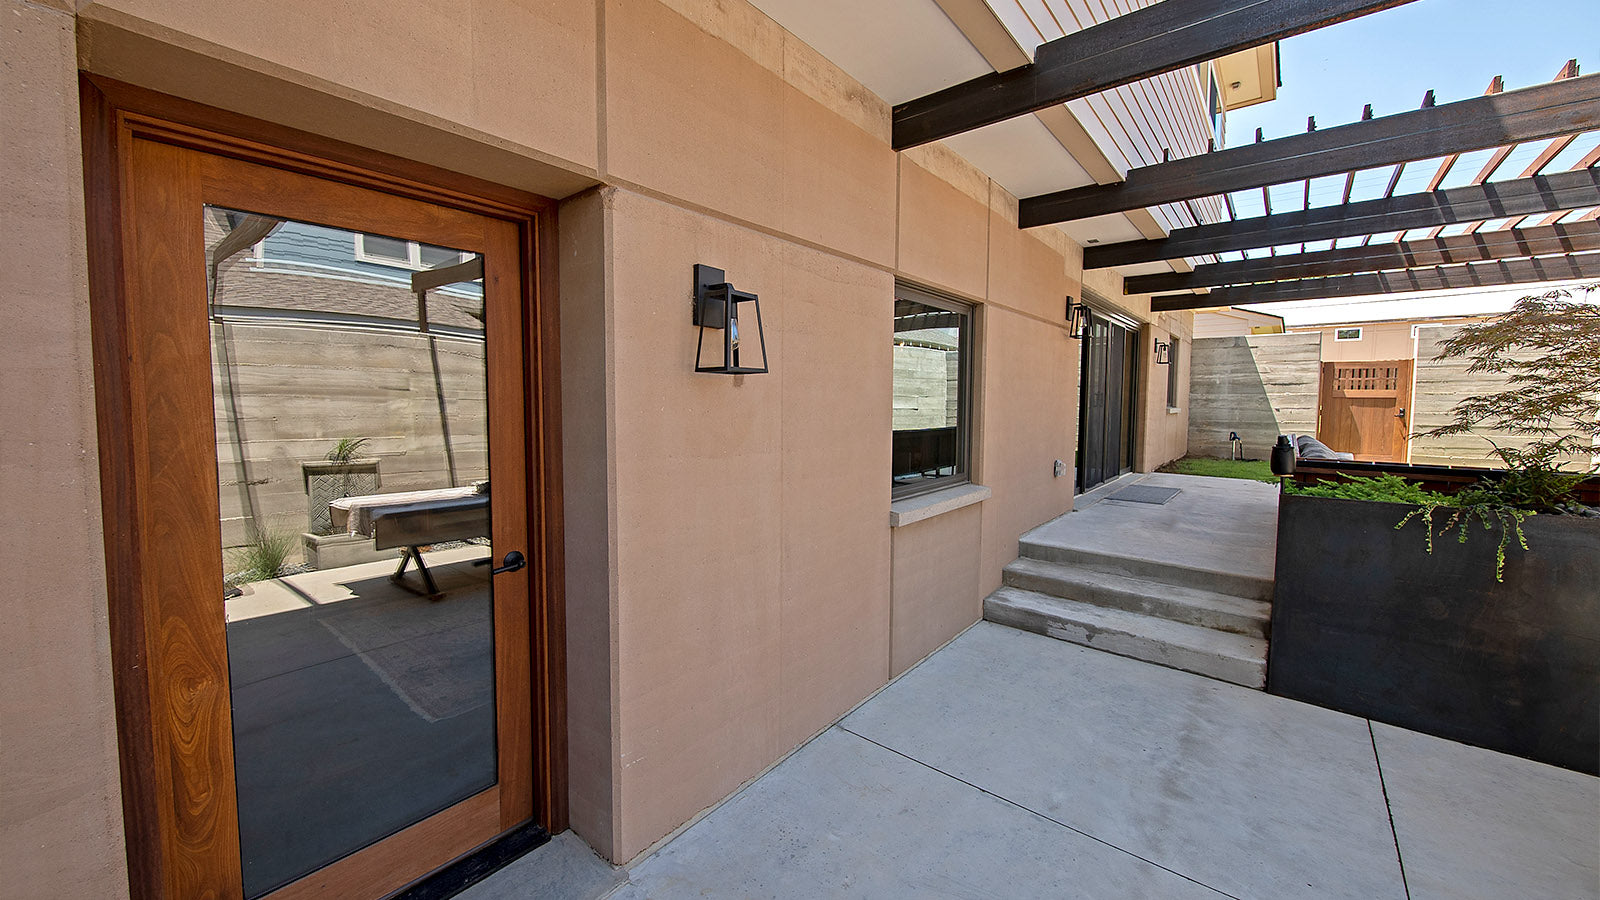 Photo of rammed earth exterior walls leading to a residential patio